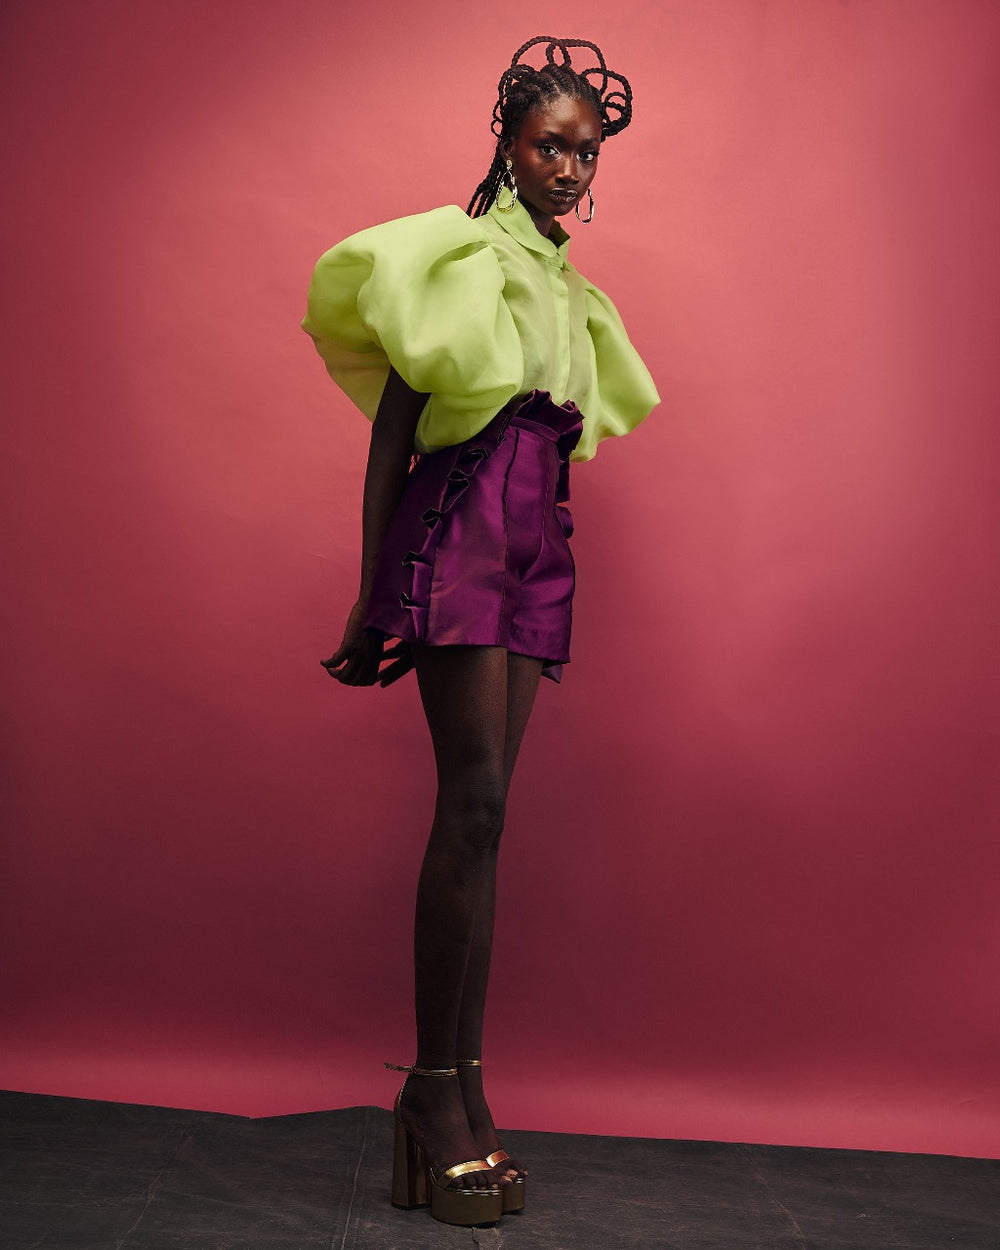 A model wearing a Chartreuse top and Aubergine colored shorts with ruffles in a red room